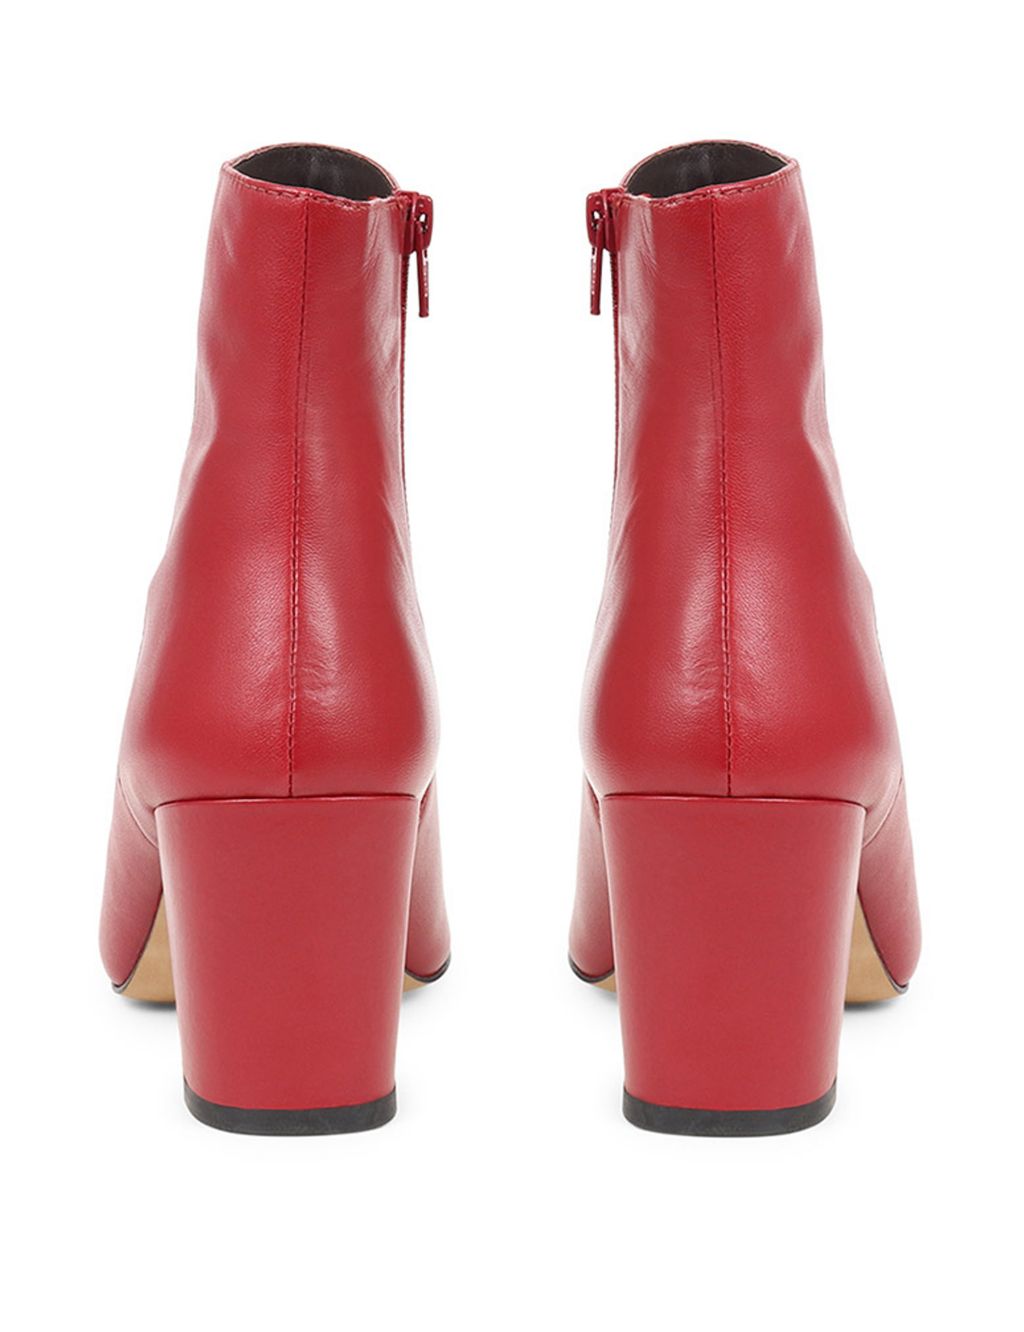 Leather Block Heel Ankle Boots image 5